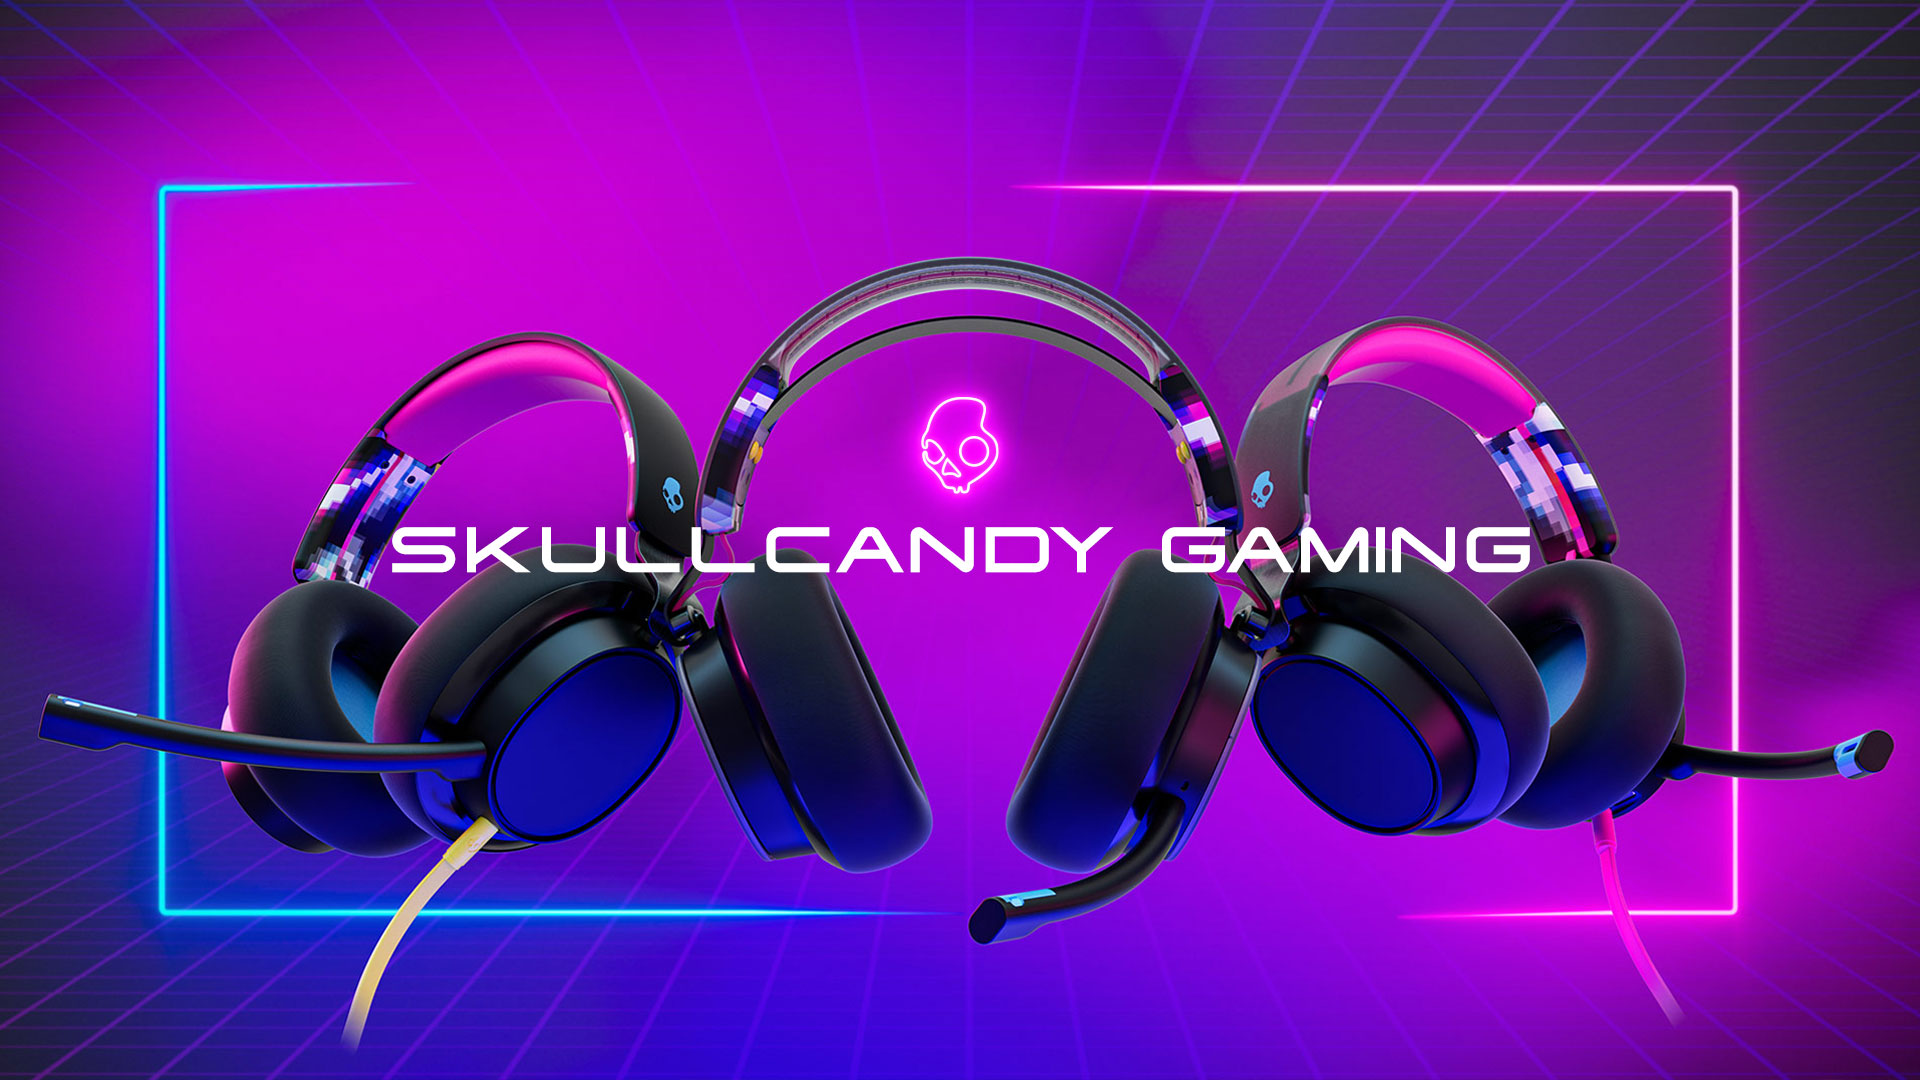 Skullcandy Gaming Introduces 3 New Headsets